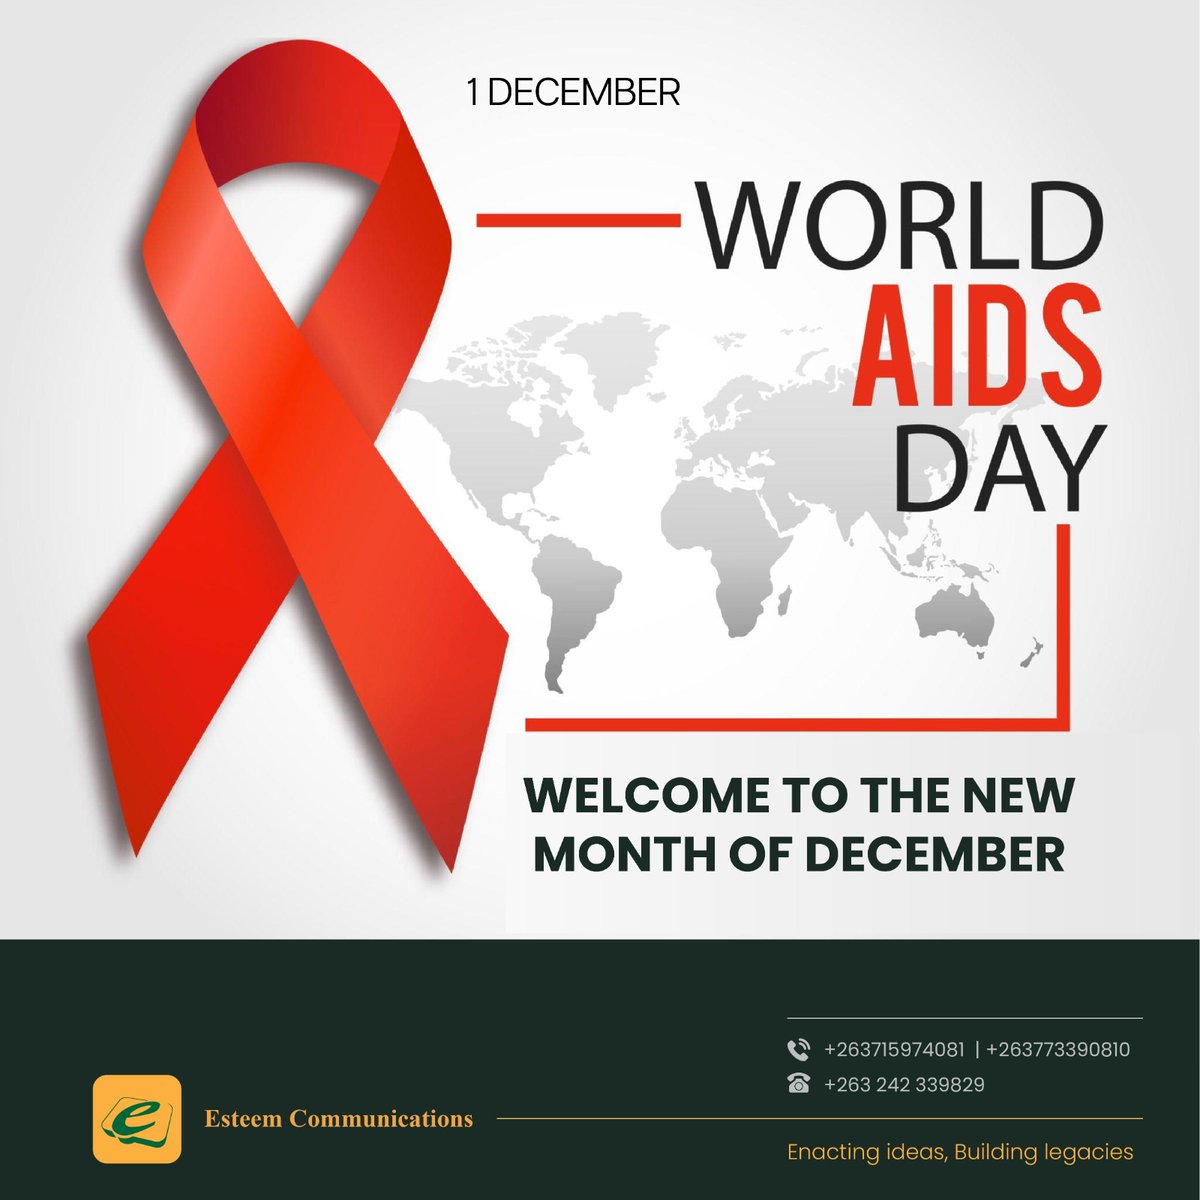 Happy New month. Spread the Love and don't discriminate. With love from the leading brand development company Esteem Communications #brandsthatcare #worldaidsday @Esteem_CarHire @takemorem1 @IdeasZaka @zimlifestylemag @alickmacheso3